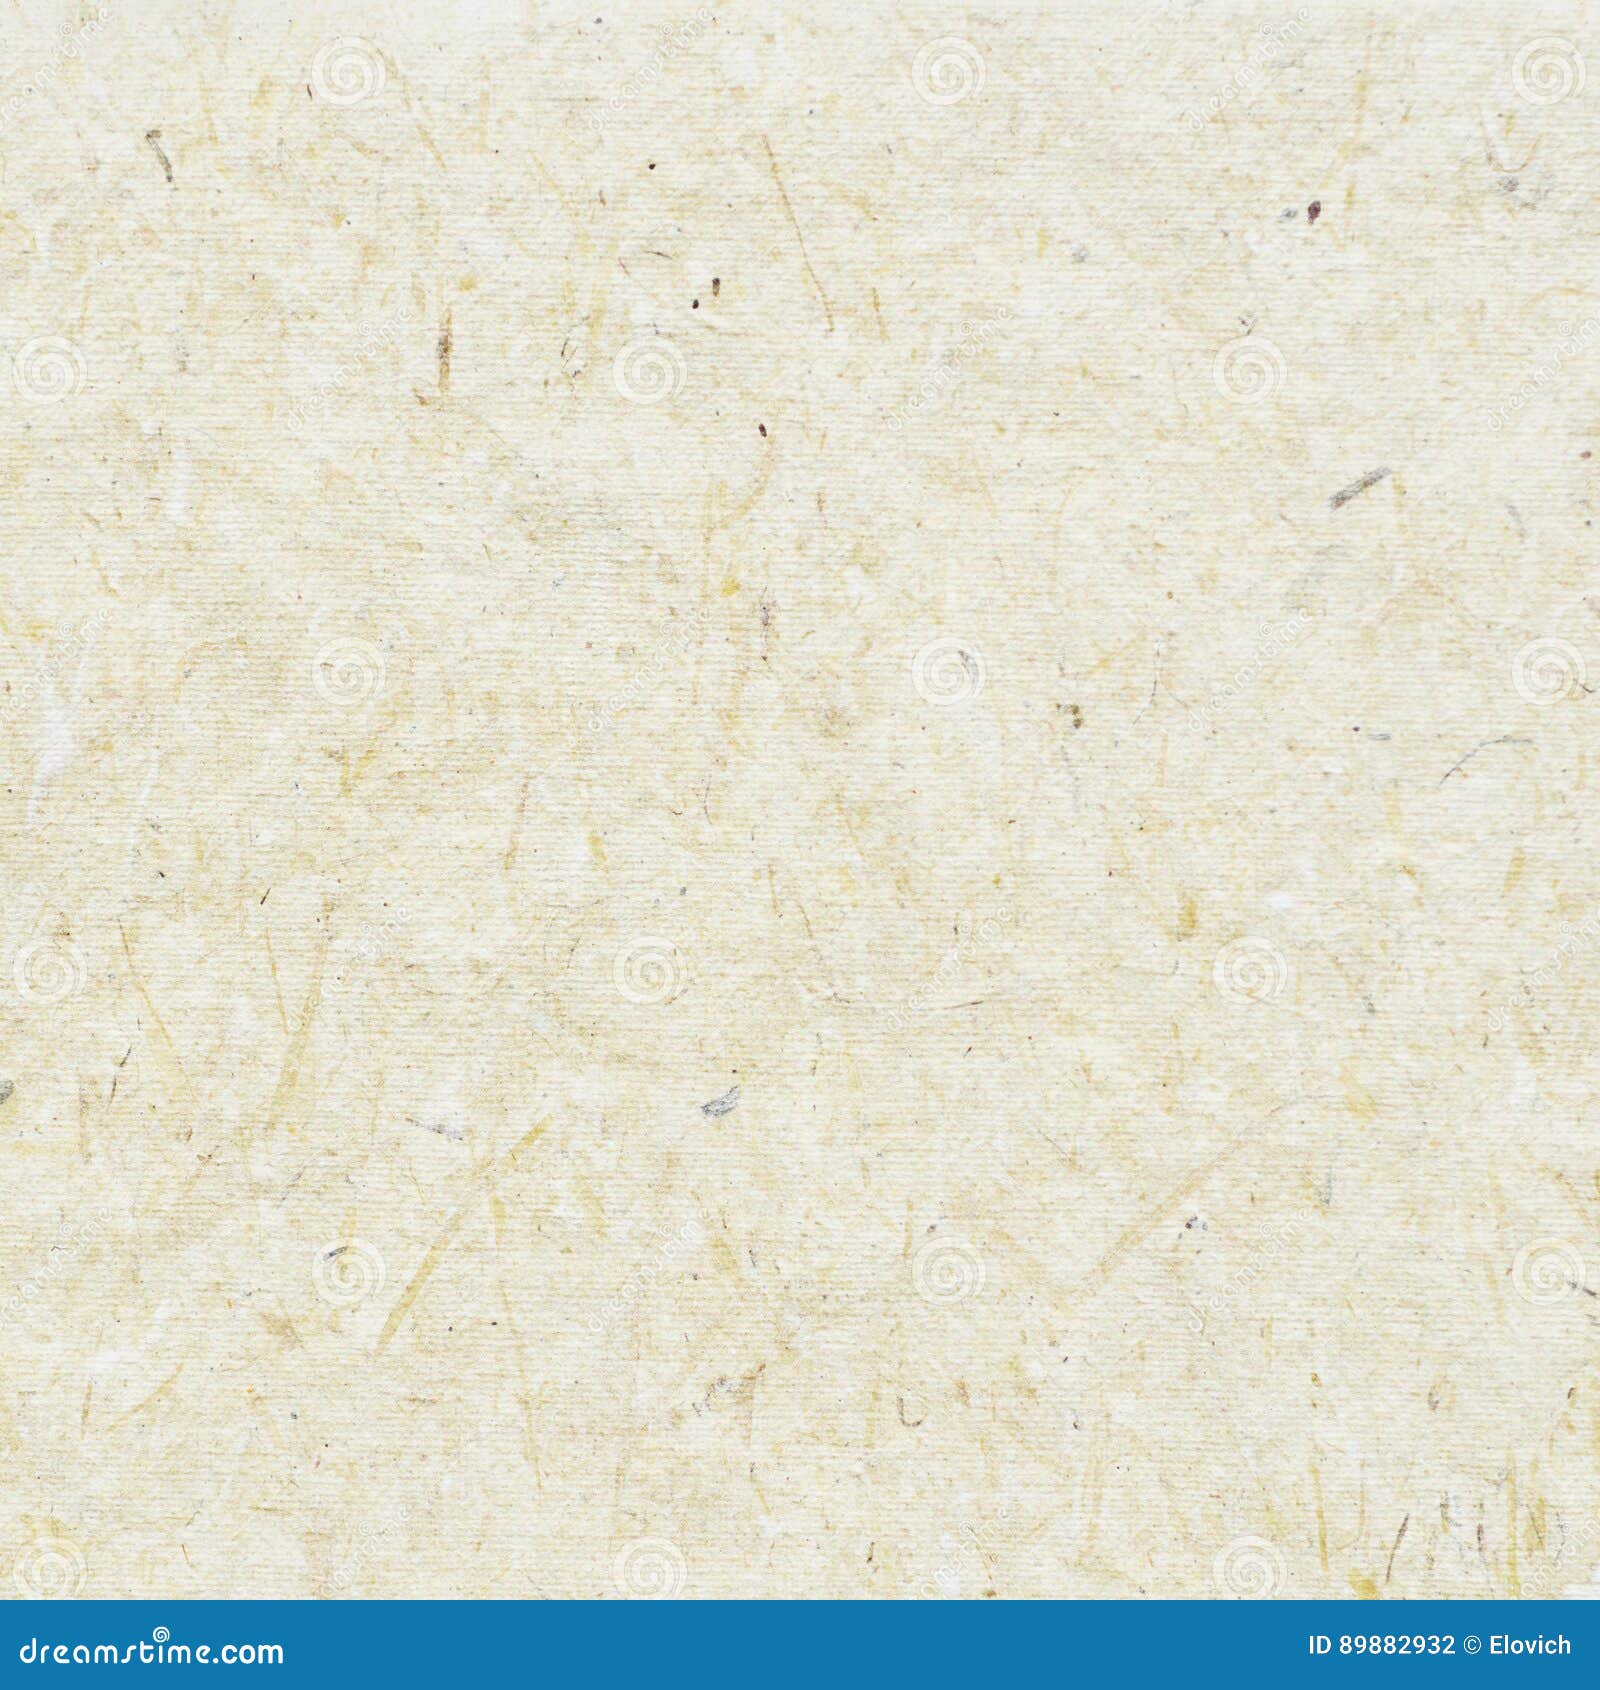 White craft paper texture stock image. Image of page - 89885621